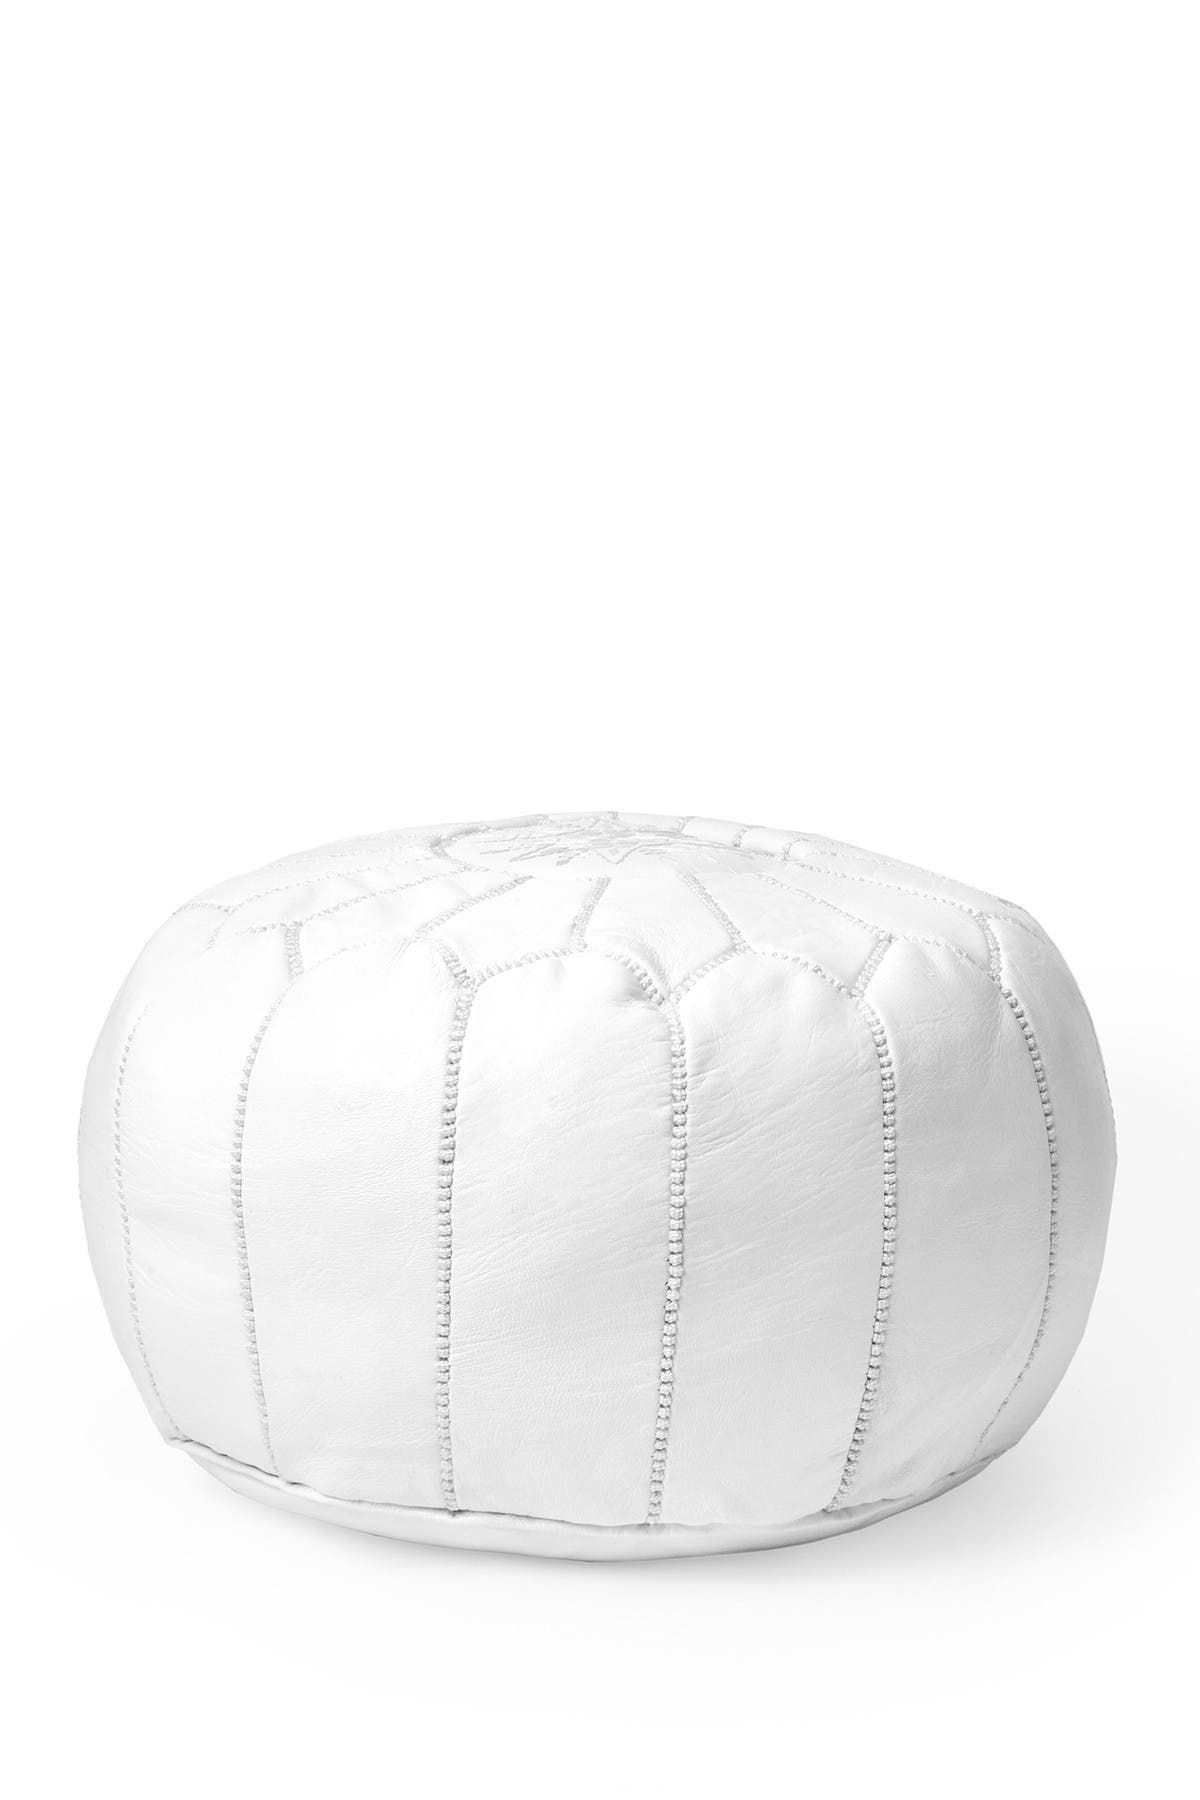 Nuloom Jerrie Moroccan Ottoman In White